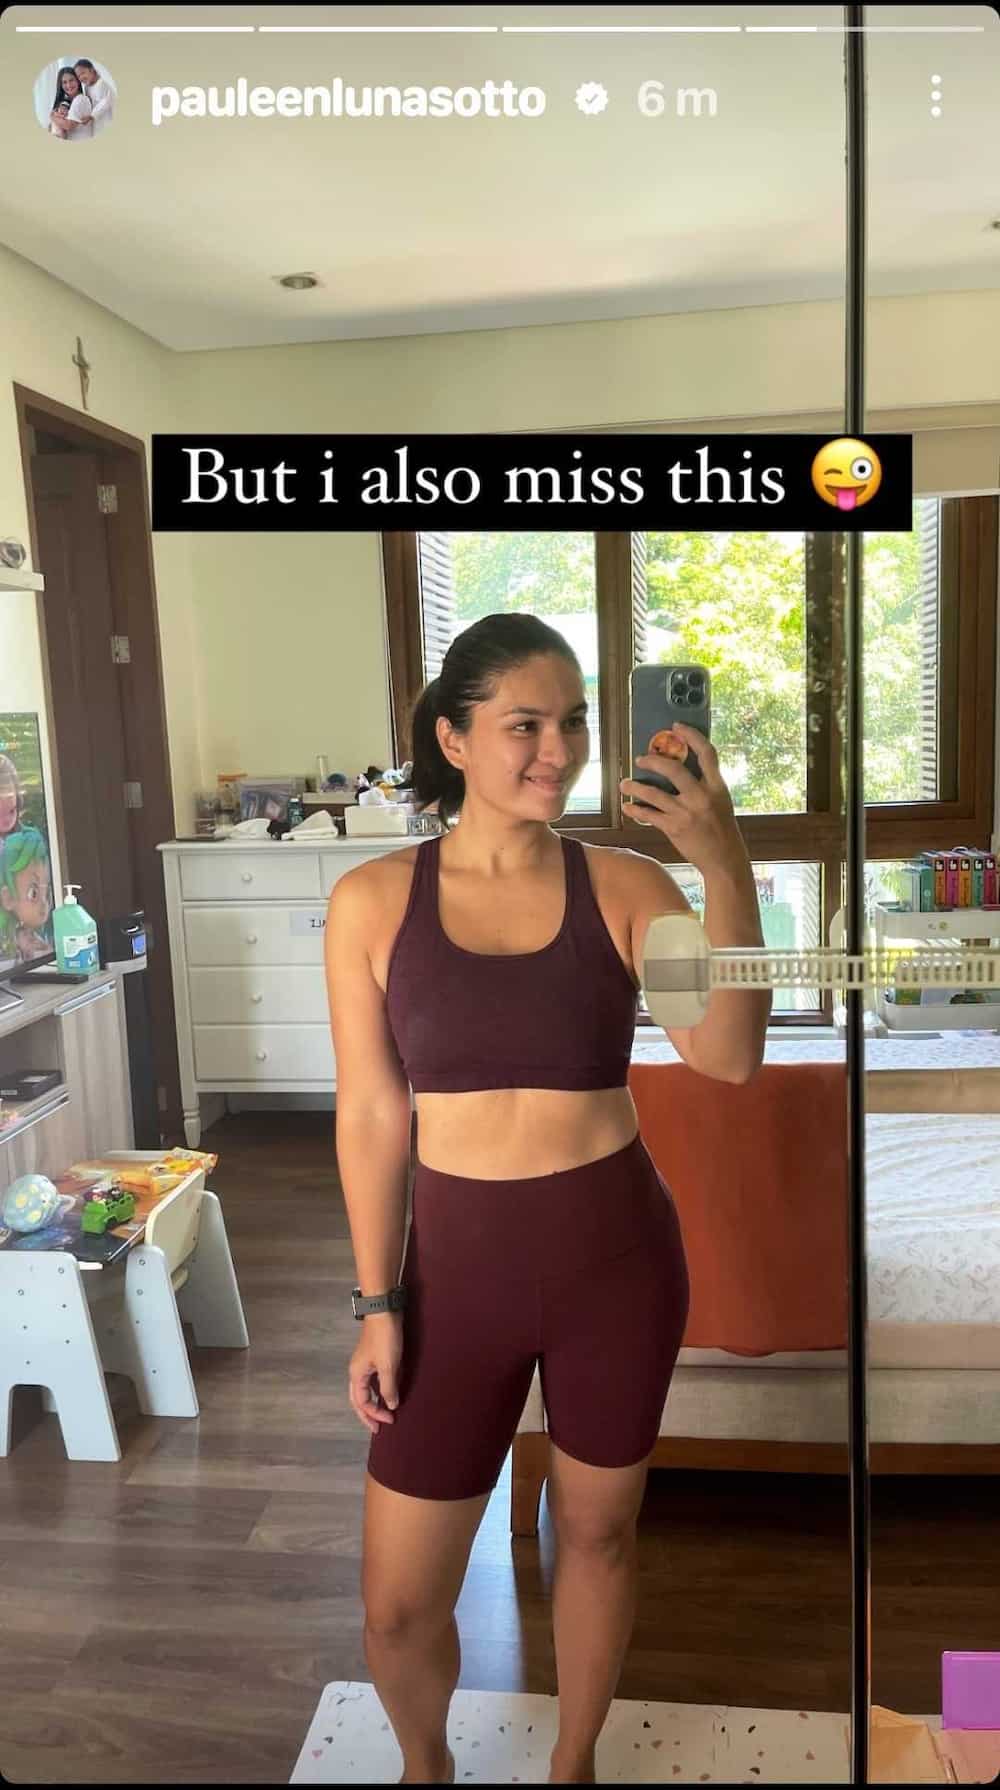 Pauleen Luna shares snaps showing her previous body shapes she misses